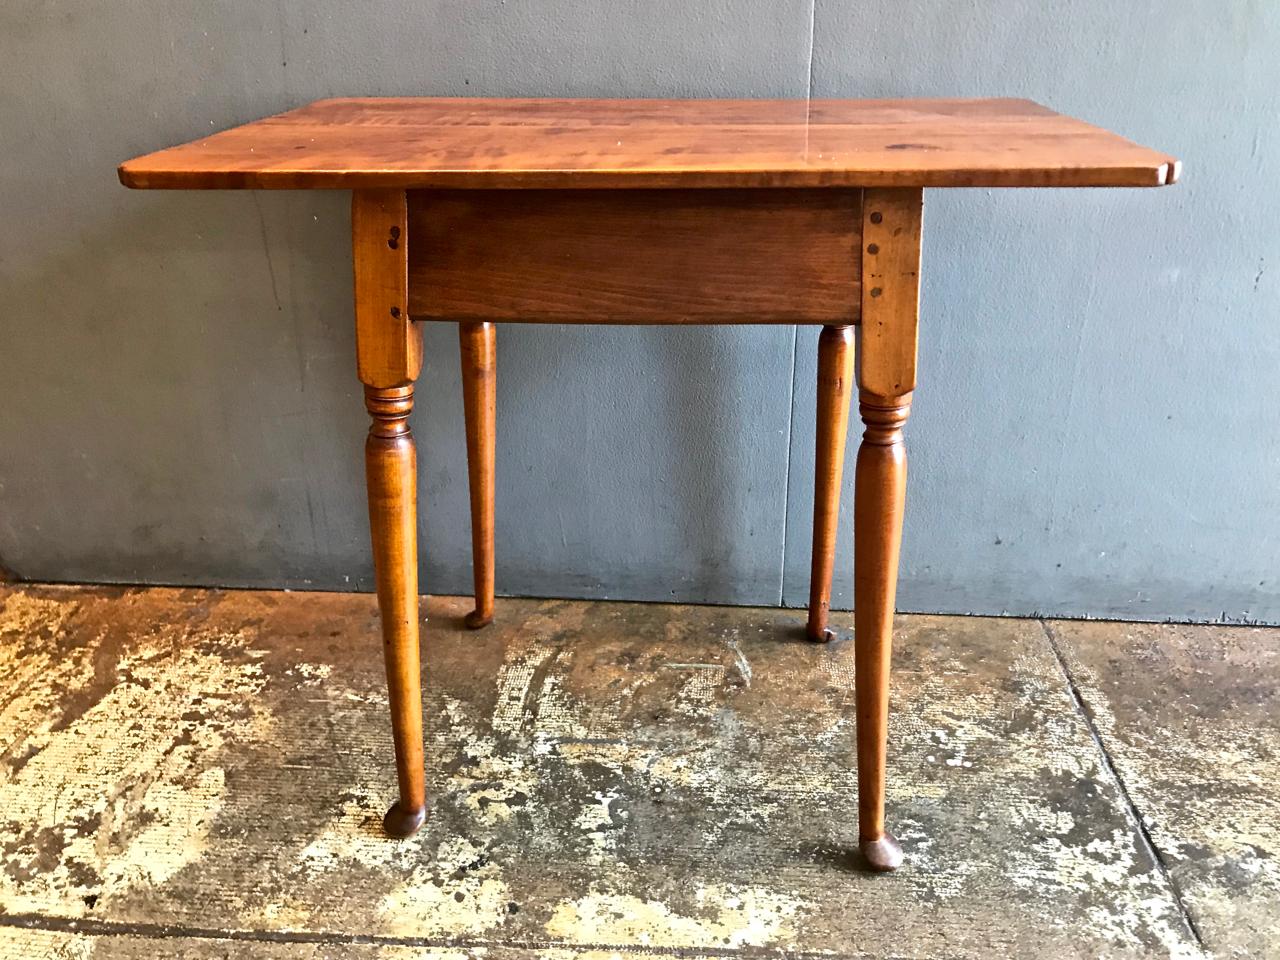 This is a refined example of an 18th century American tiger maple Queen Anne tavern table or side table. The legs are of graceful proportions and end in small pad feet; the inverted table corners add to its elegance. This would make a wonderful